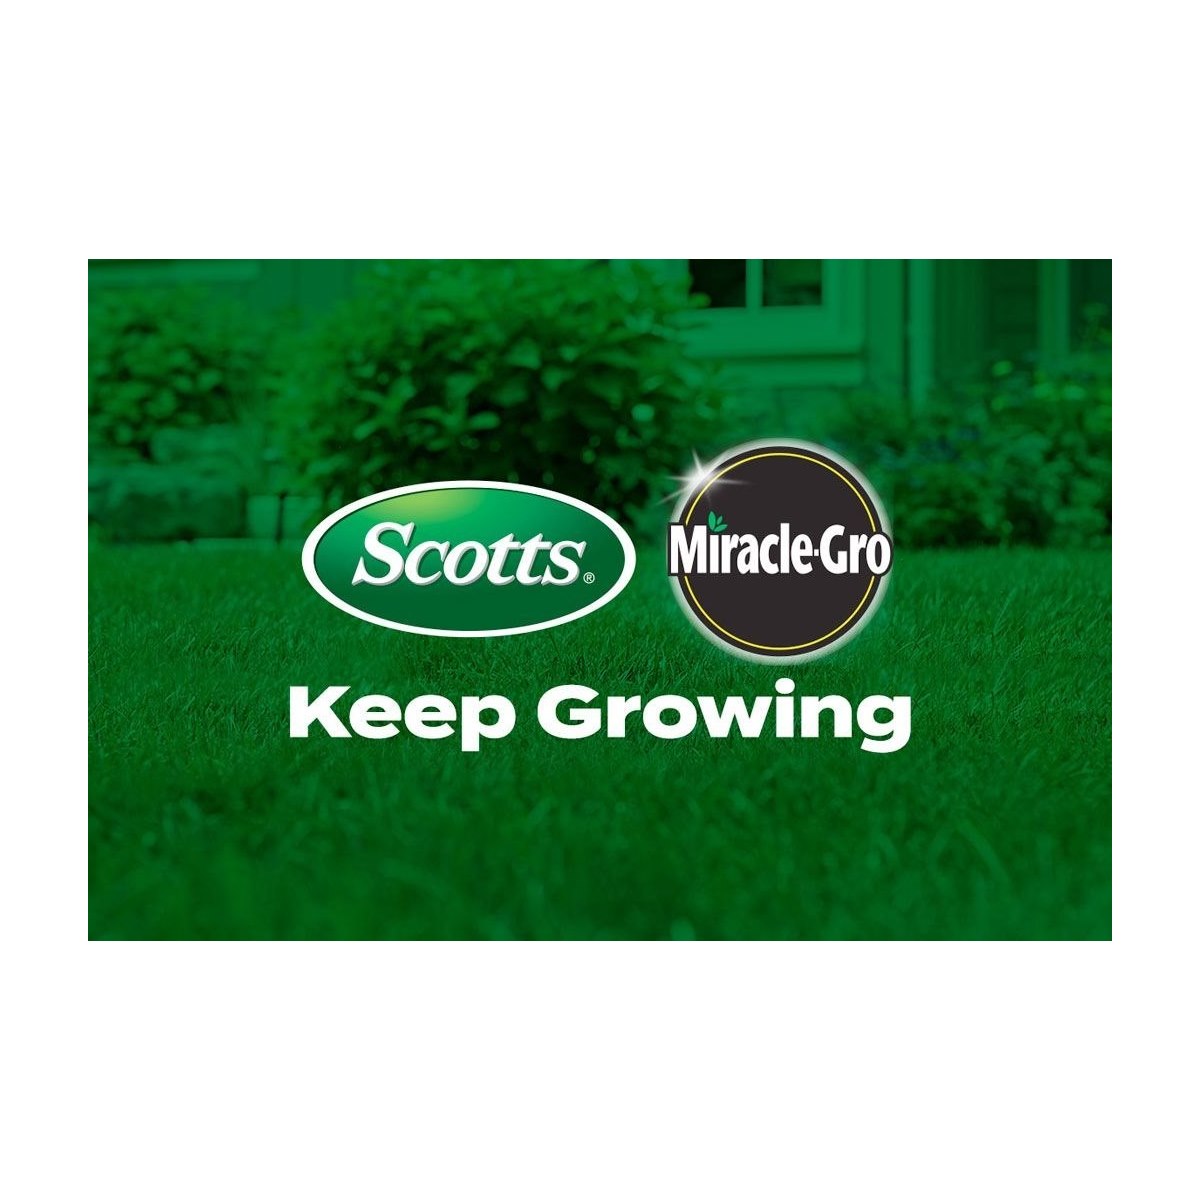 Where to Buy Scotts Miracle Gro Products